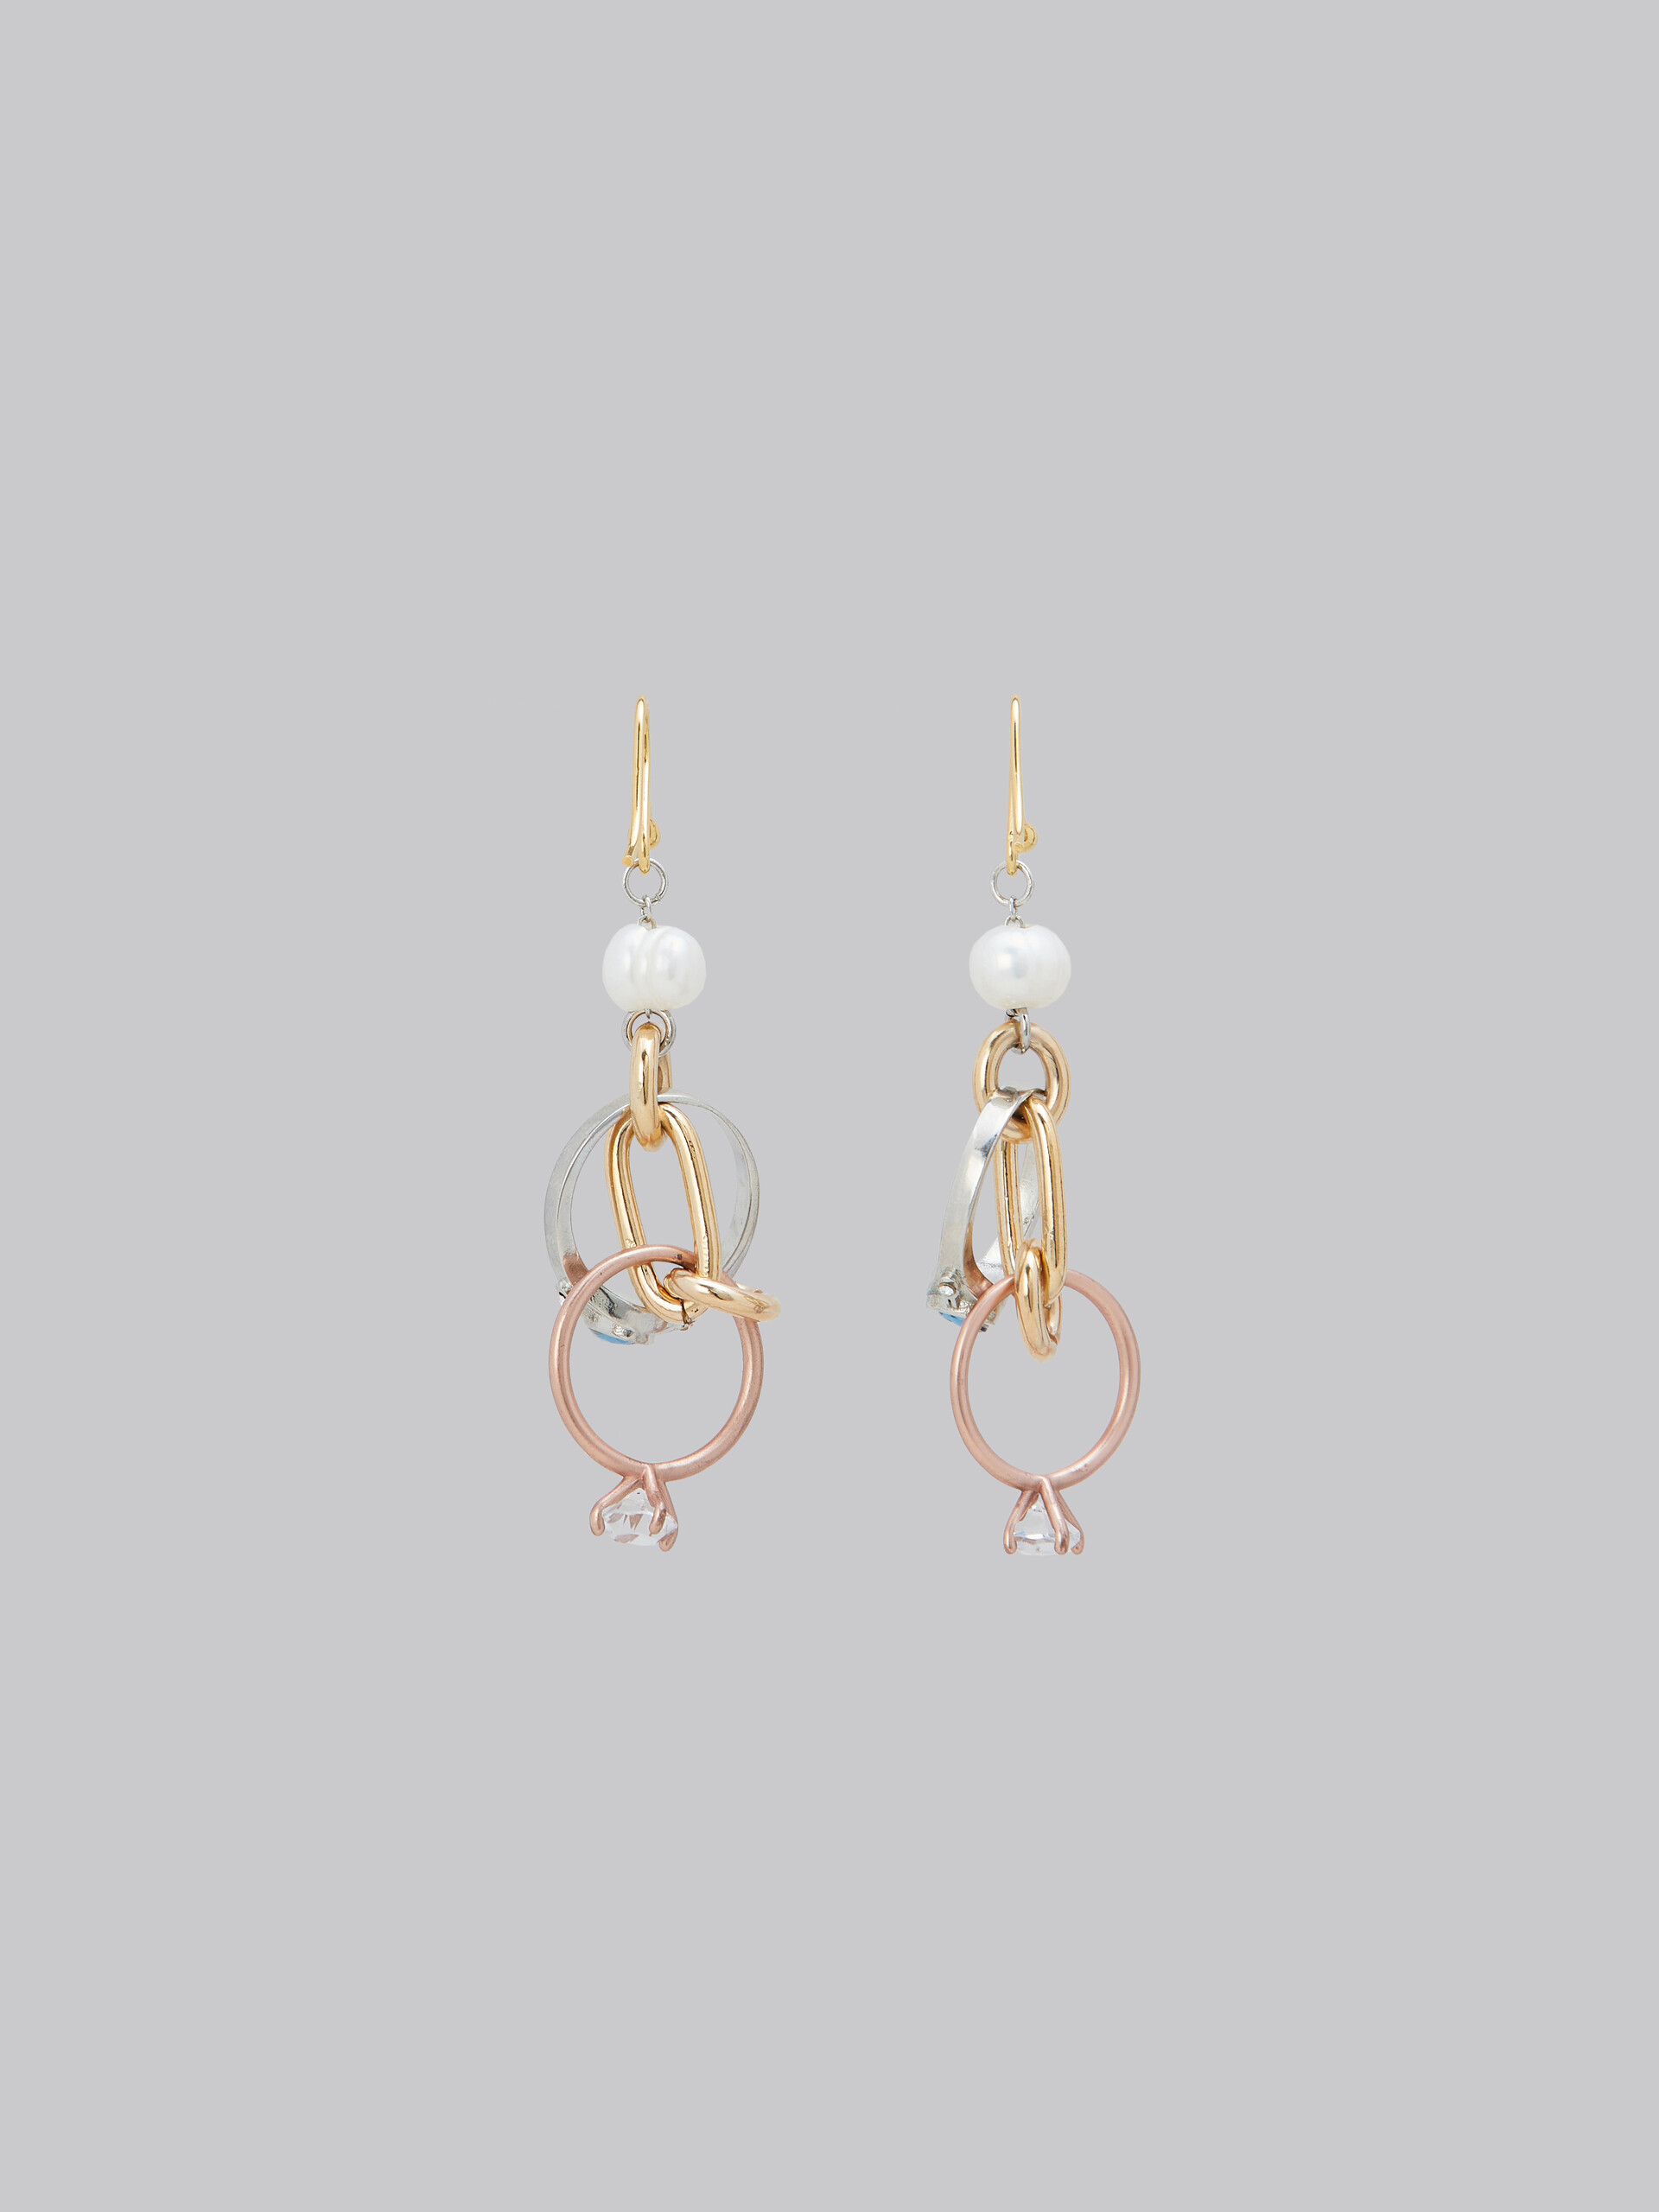 Drop earrings with chains and rings - Earrings - Image 3